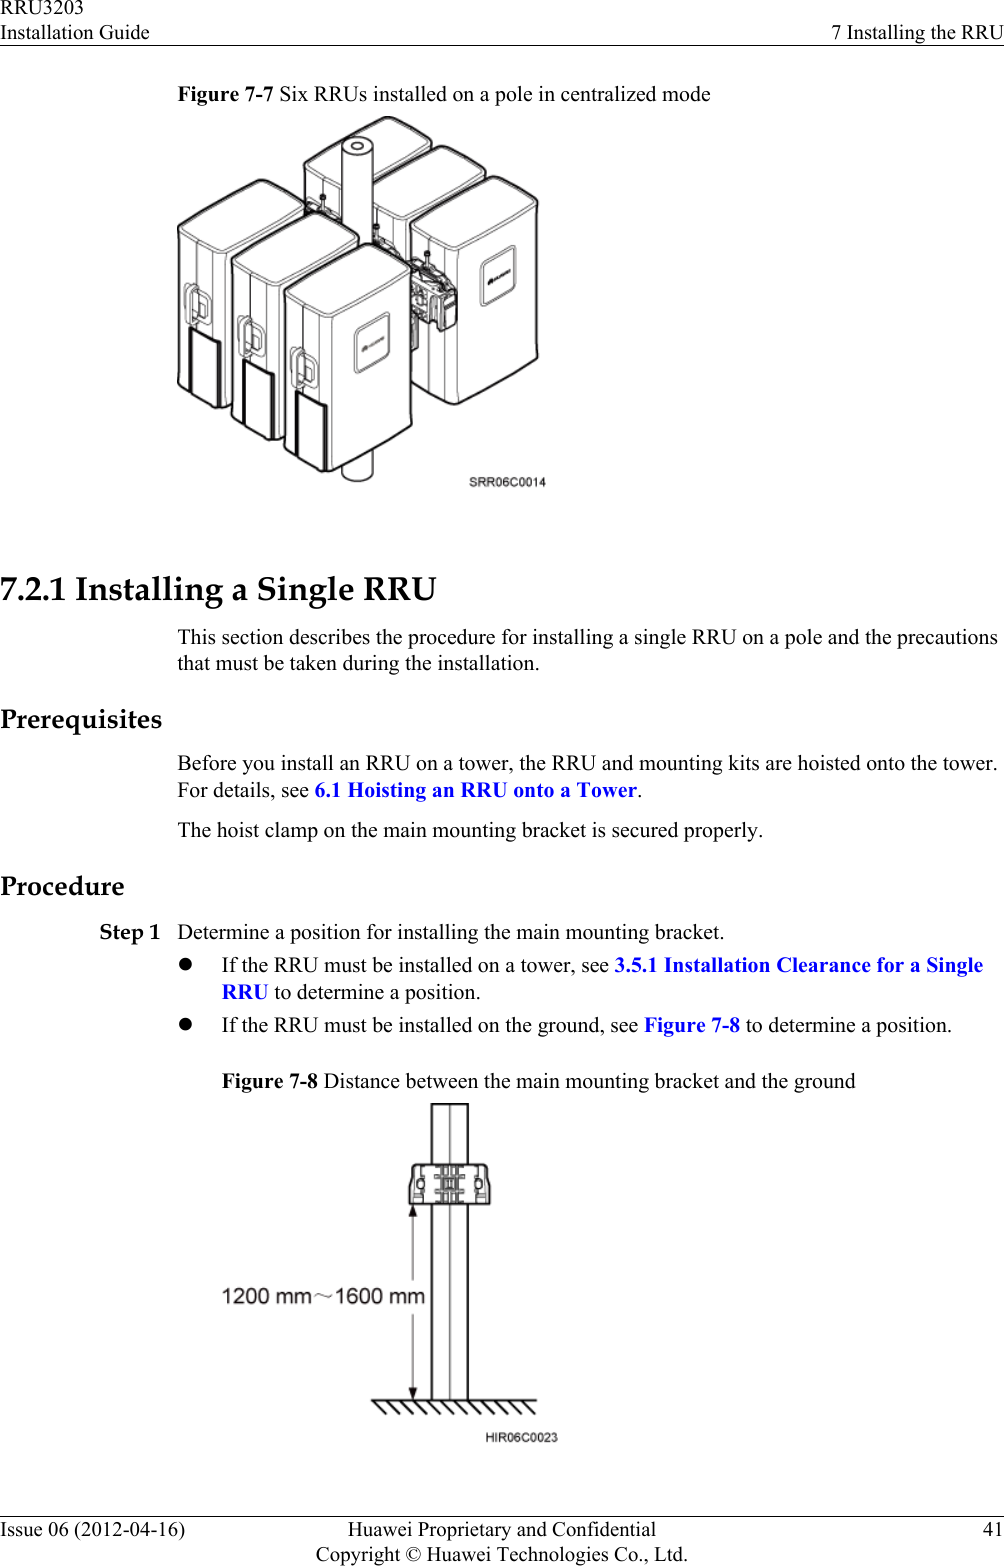 Figure 7-7 Six RRUs installed on a pole in centralized mode 7.2.1 Installing a Single RRUThis section describes the procedure for installing a single RRU on a pole and the precautionsthat must be taken during the installation.PrerequisitesBefore you install an RRU on a tower, the RRU and mounting kits are hoisted onto the tower.For details, see 6.1 Hoisting an RRU onto a Tower.The hoist clamp on the main mounting bracket is secured properly.ProcedureStep 1 Determine a position for installing the main mounting bracket.lIf the RRU must be installed on a tower, see 3.5.1 Installation Clearance for a SingleRRU to determine a position.lIf the RRU must be installed on the ground, see Figure 7-8 to determine a position.Figure 7-8 Distance between the main mounting bracket and the groundRRU3203Installation Guide 7 Installing the RRUIssue 06 (2012-04-16) Huawei Proprietary and ConfidentialCopyright © Huawei Technologies Co., Ltd.41